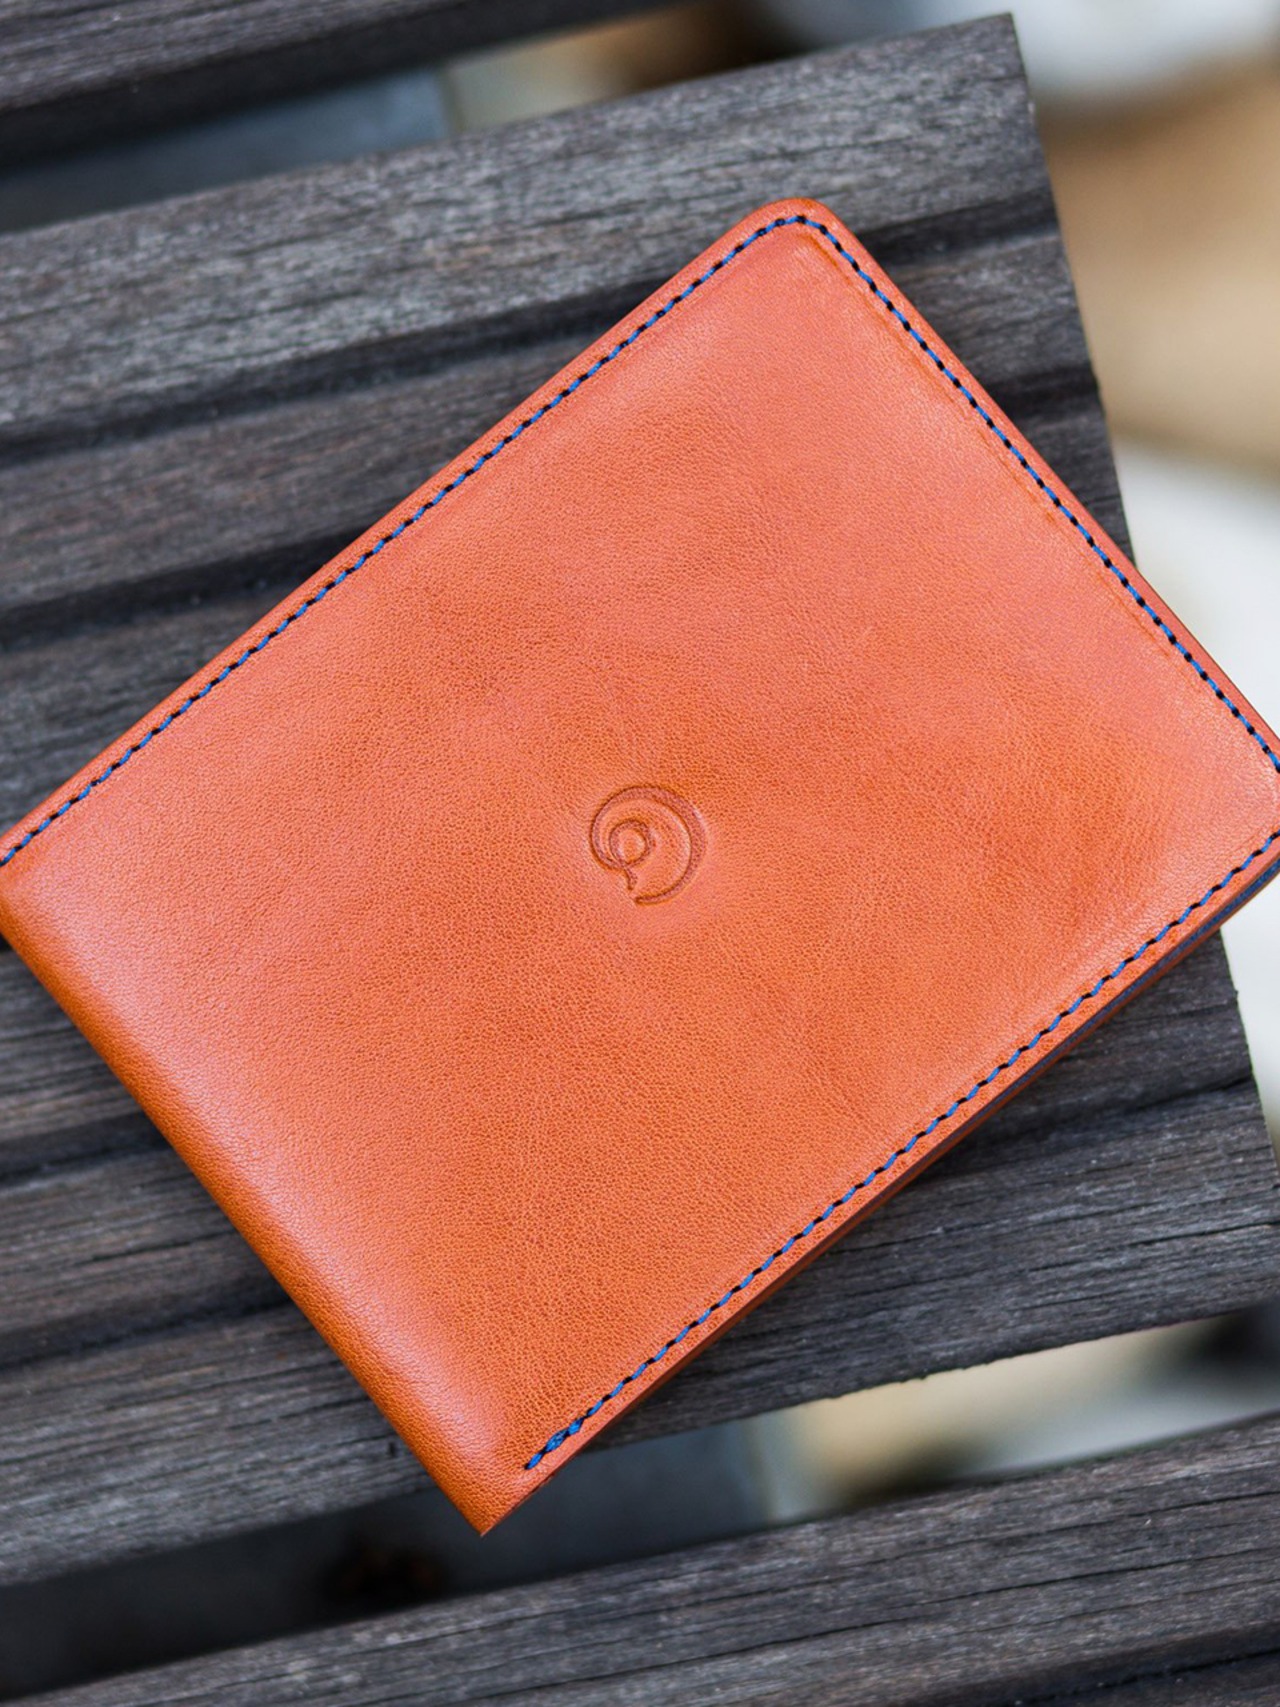 Danny P.「Leather coin wallet brown/blue」